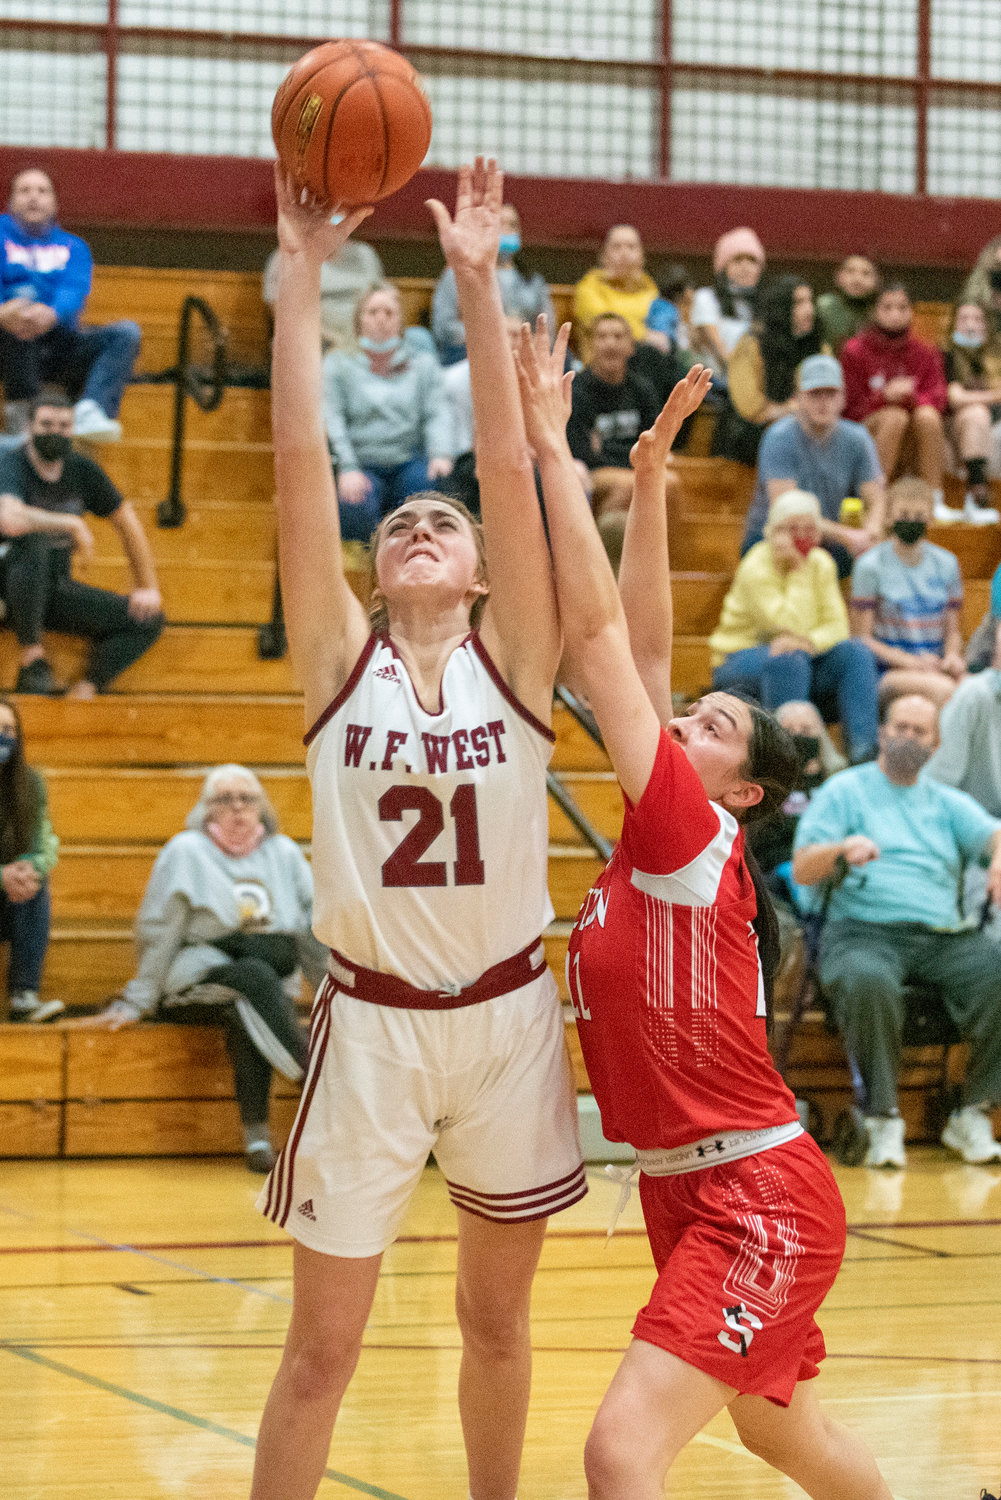 W.F. West's Morgan Rogerson goes up for a layin against Shelton on Dec. 7.